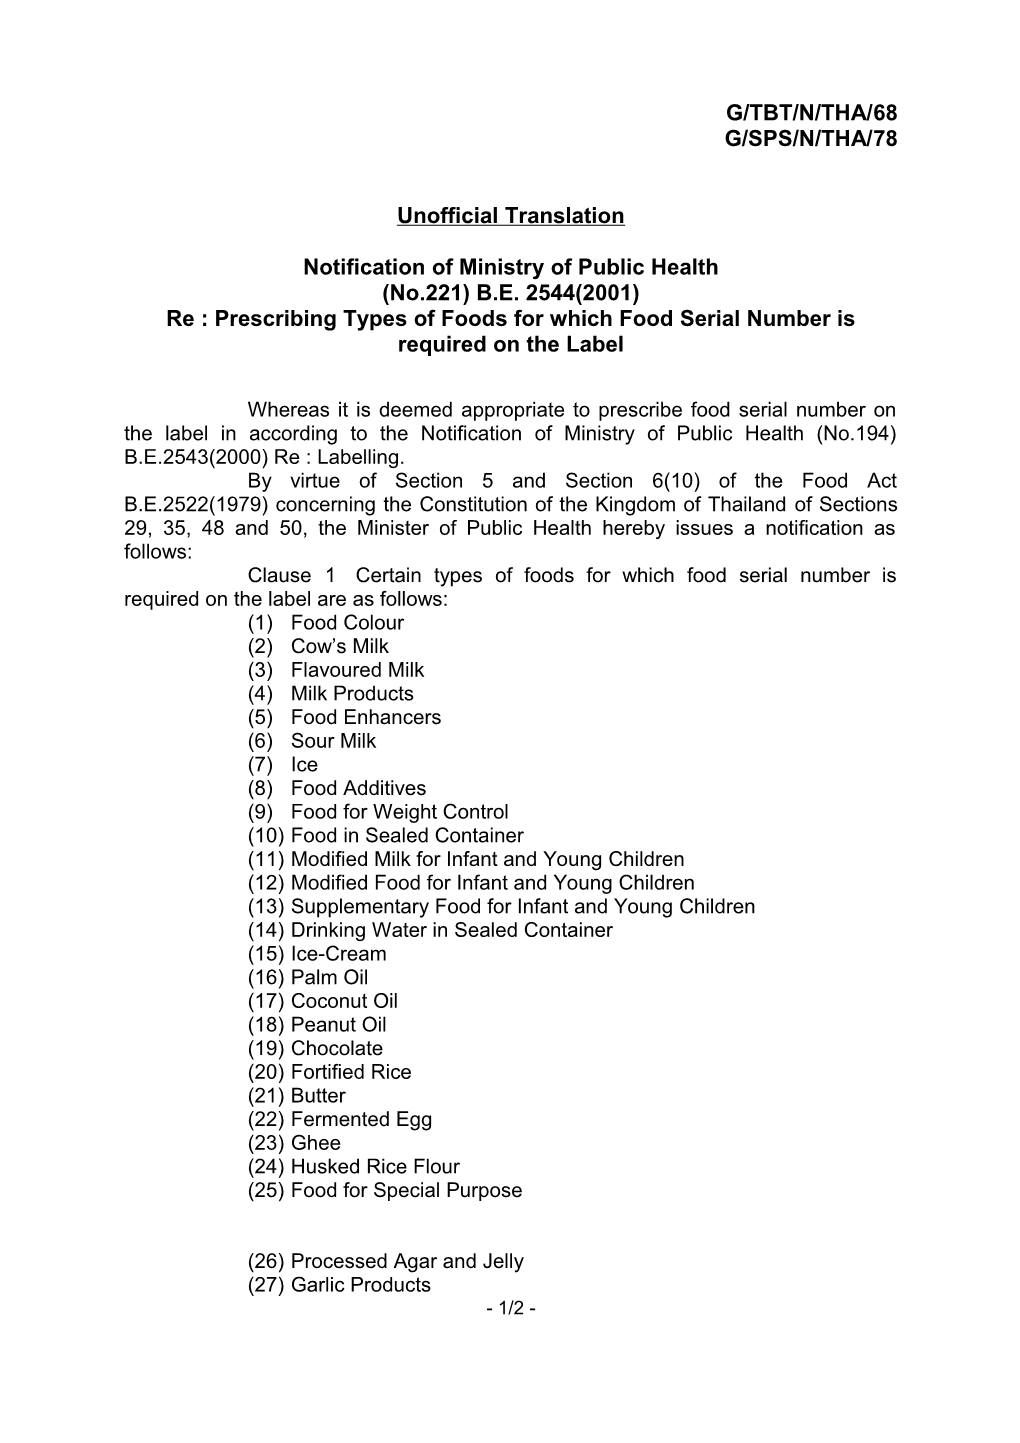 Notification of Ministry of Public Health